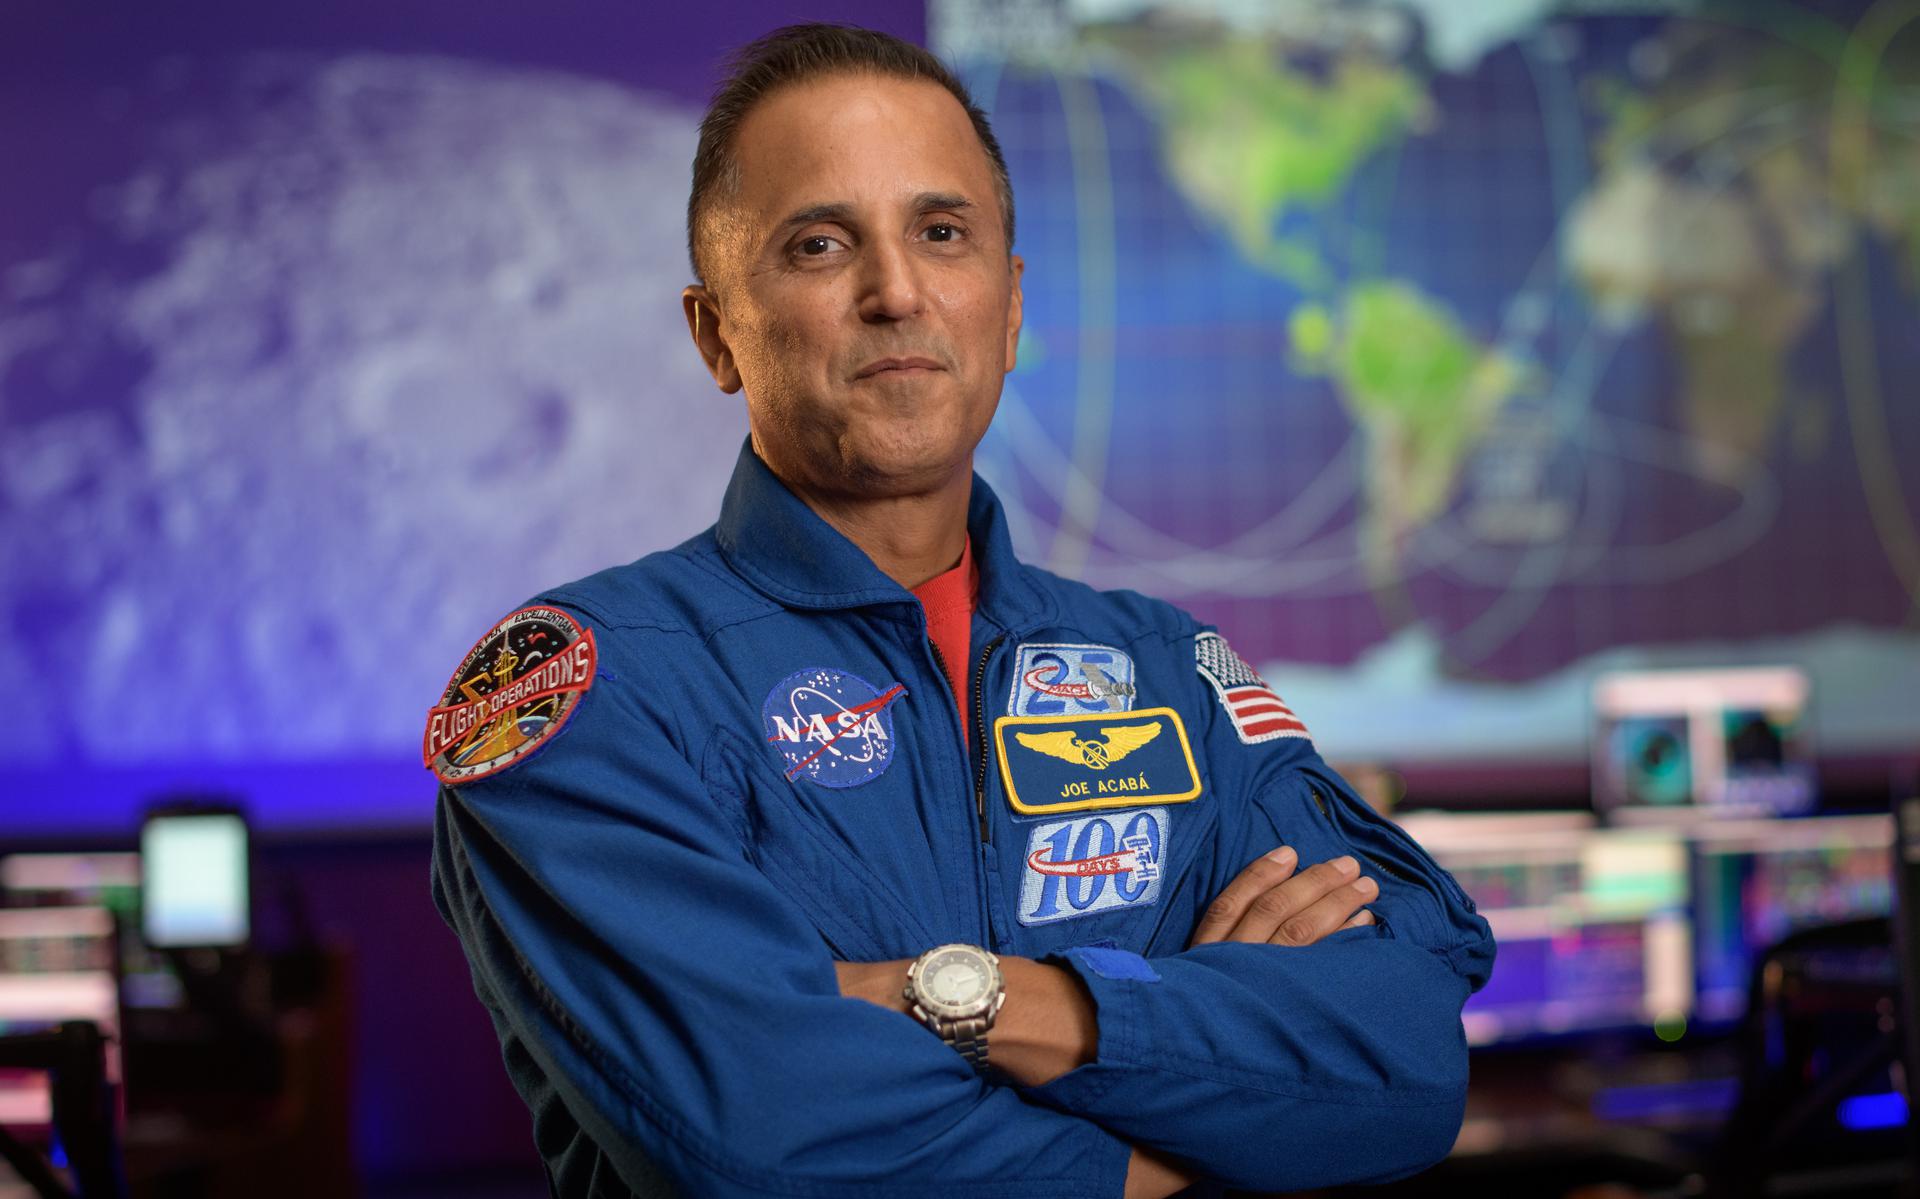 NASA astronaut Joe Acaba stands with arms crossed.